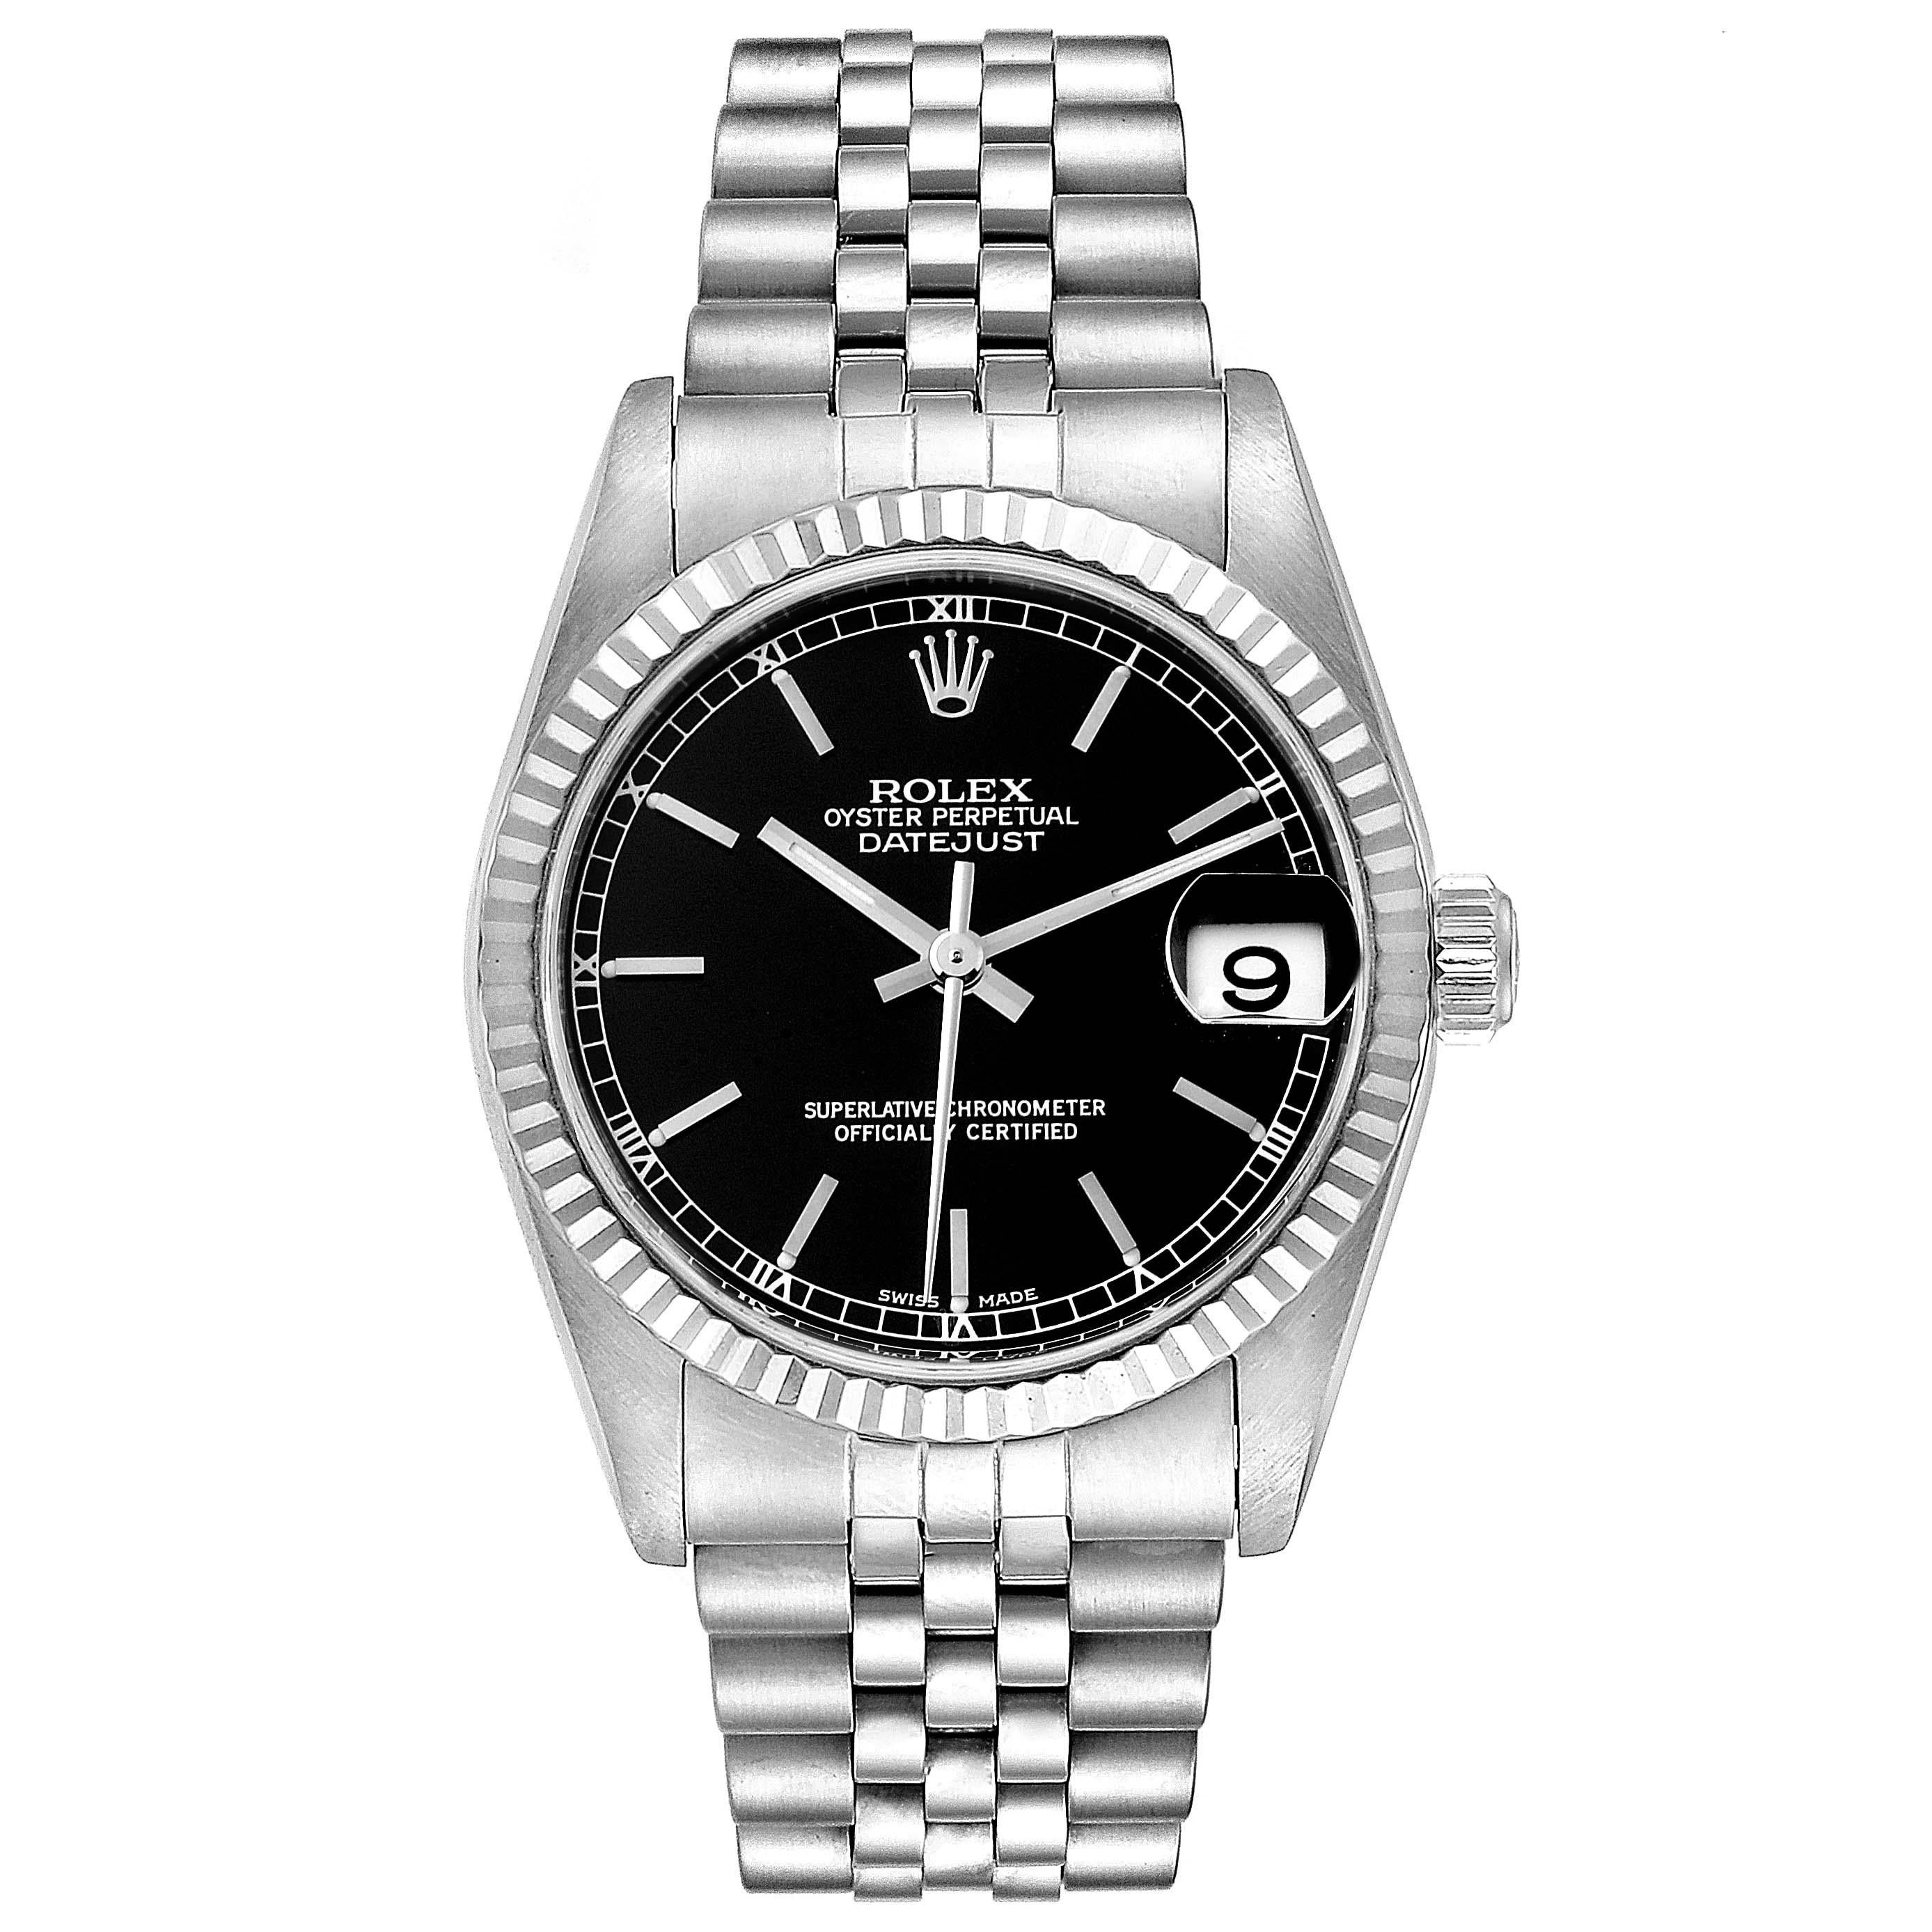 Rolex Datejust Midsize Steel White Gold Black Dial Ladies Watch 78274. Officially certified chronometer self-winding movement. Stainless steel oyster case 31 mm in diameter. Rolex logo on a crown. 18k white gold fluted bezel. Scratch resistant